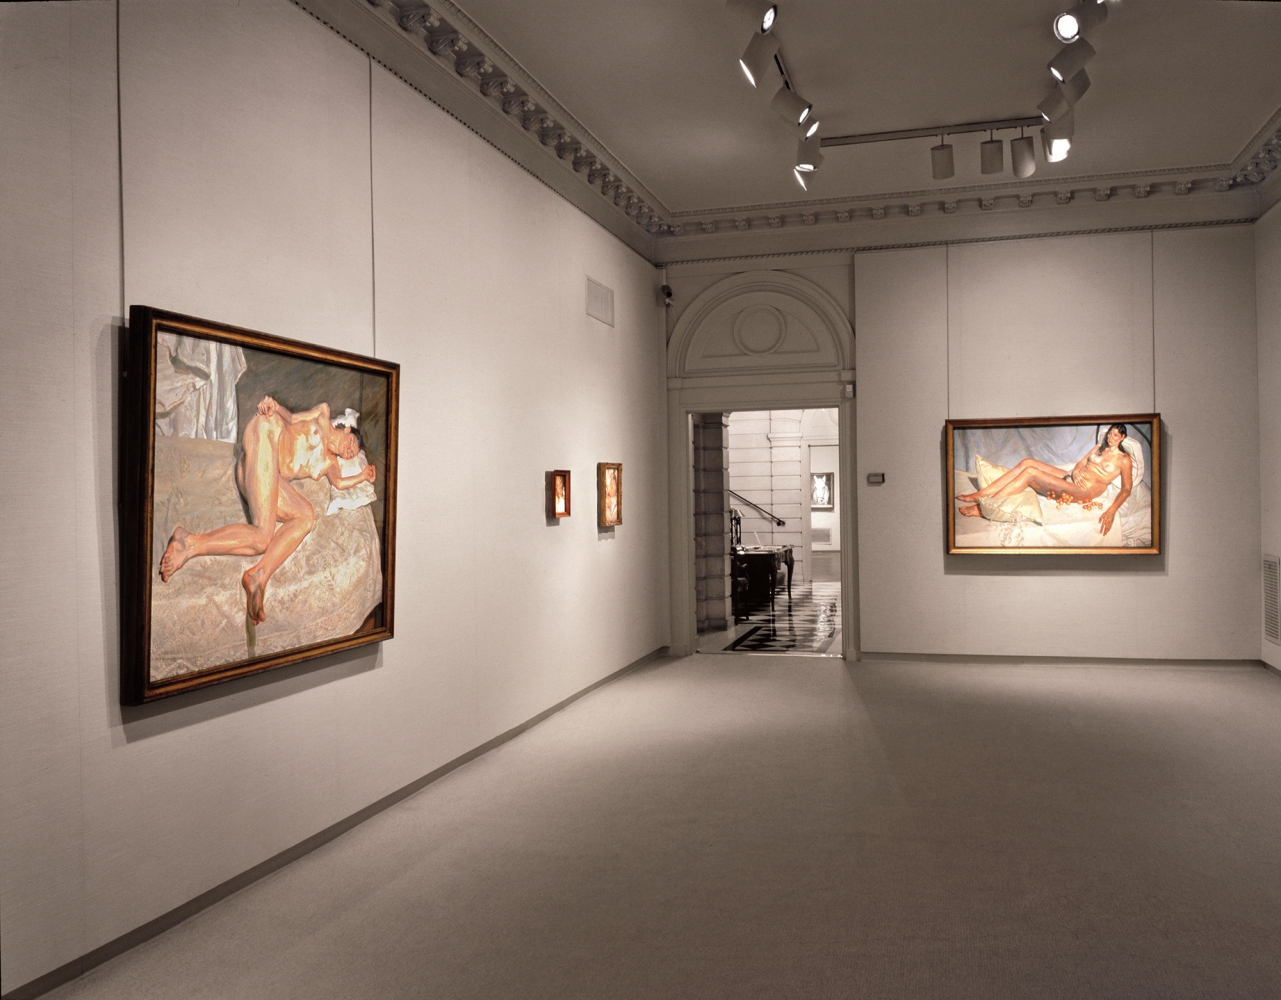 Installation view of&nbsp;Lucian Freud: Recent Paintings and Etchings, April 28&ndash;May 27,&nbsp;2004. Art&nbsp;&copy; The Lucian Freud Archive / Bridgeman Images.